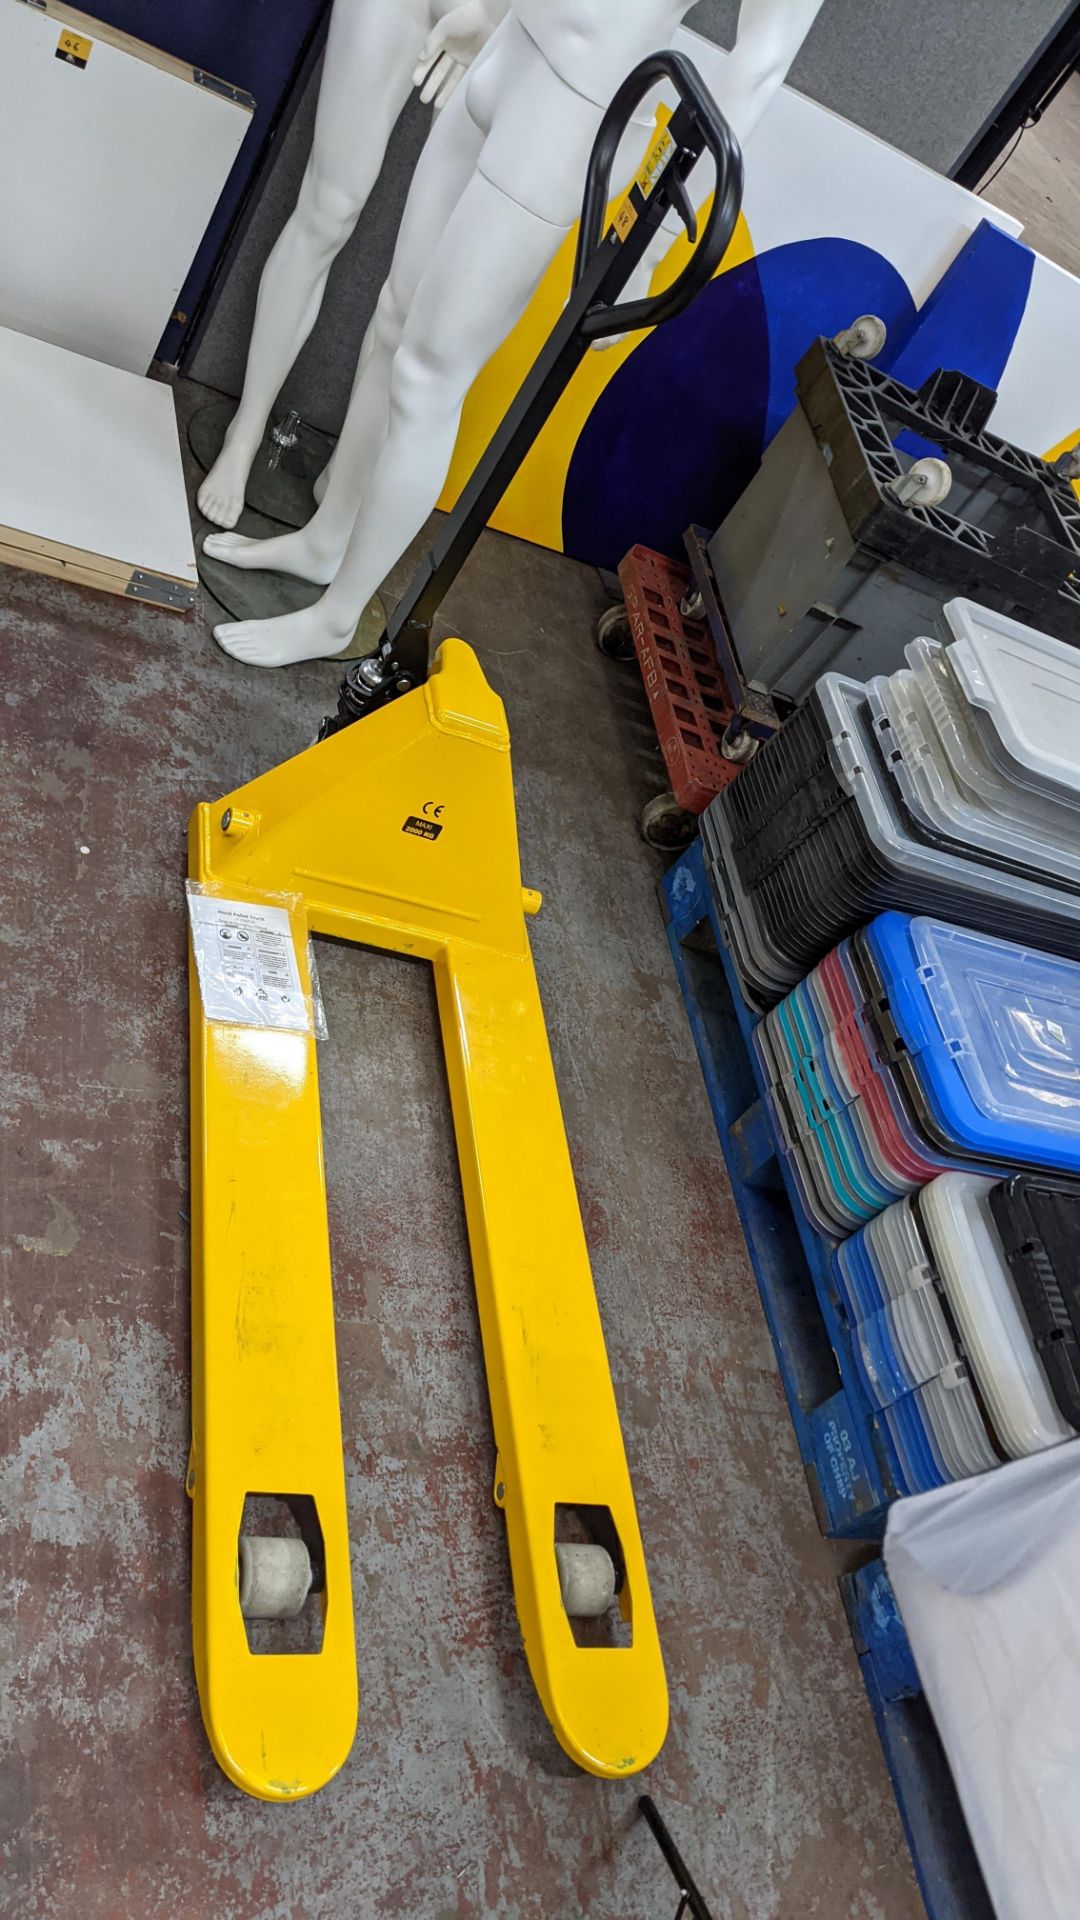 Euro pallet truck - 2000kg capacity, including manual